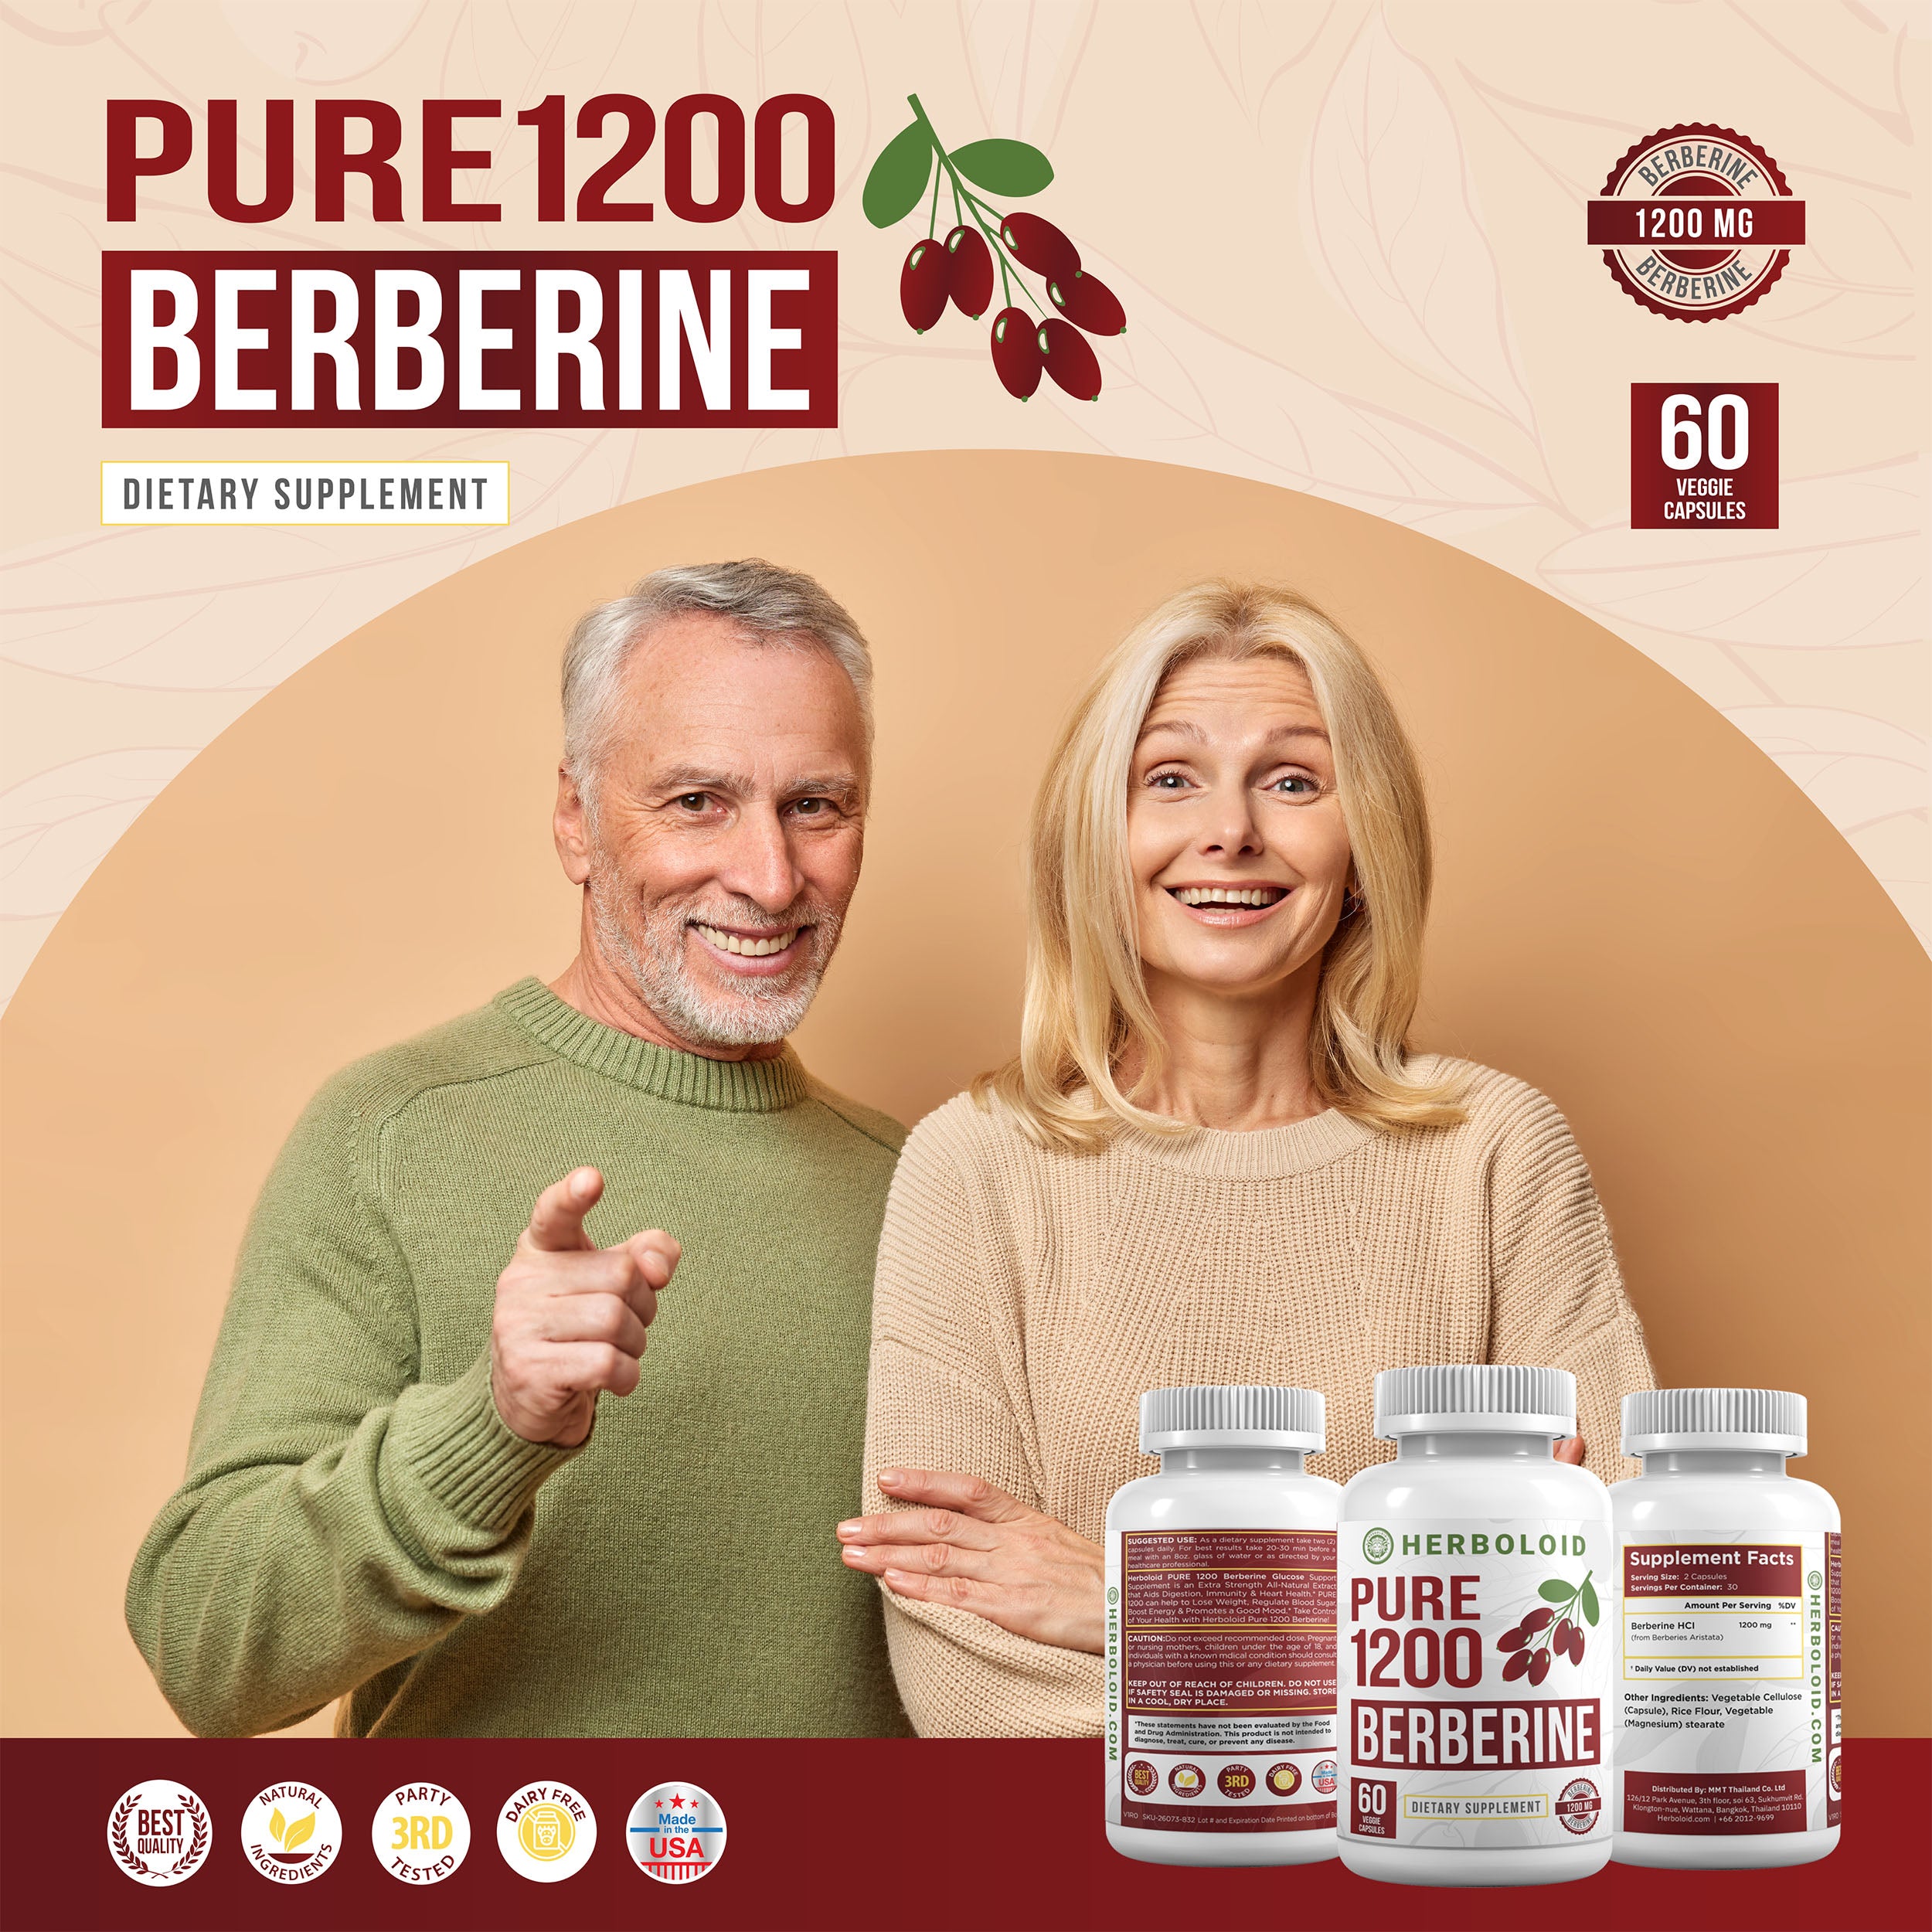 FLASH SALE Herboloid Pure 1200 Berberine Glucose Support Supplement Blood Sugar, Cholesterol, Immune, Weight Loss, Heart, Mood & Energy Aid